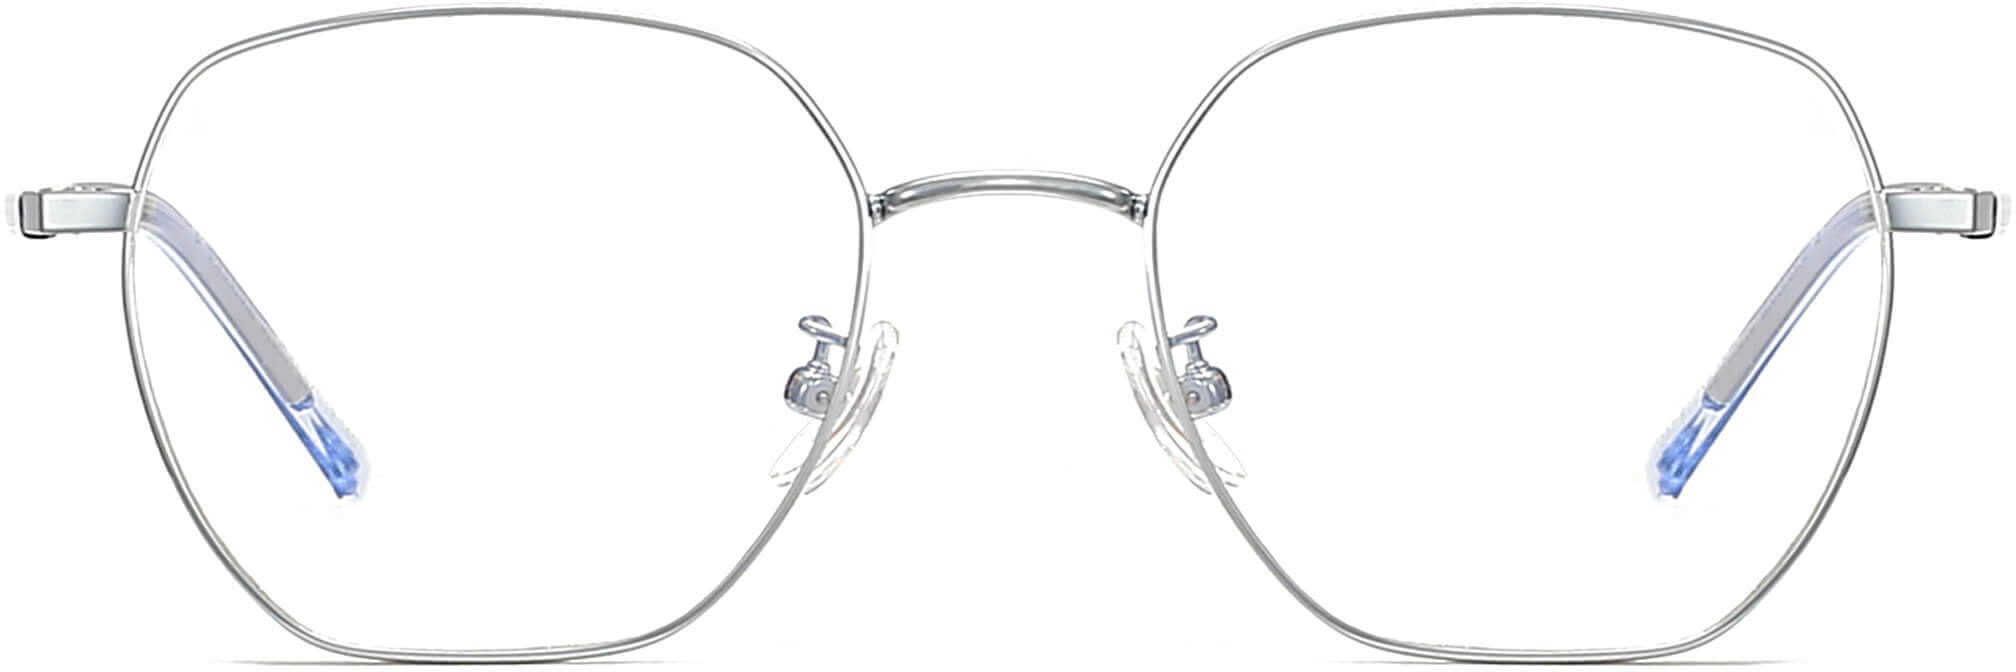 Pavone Geometric Silver Eyeglasses from ANRRI, front view